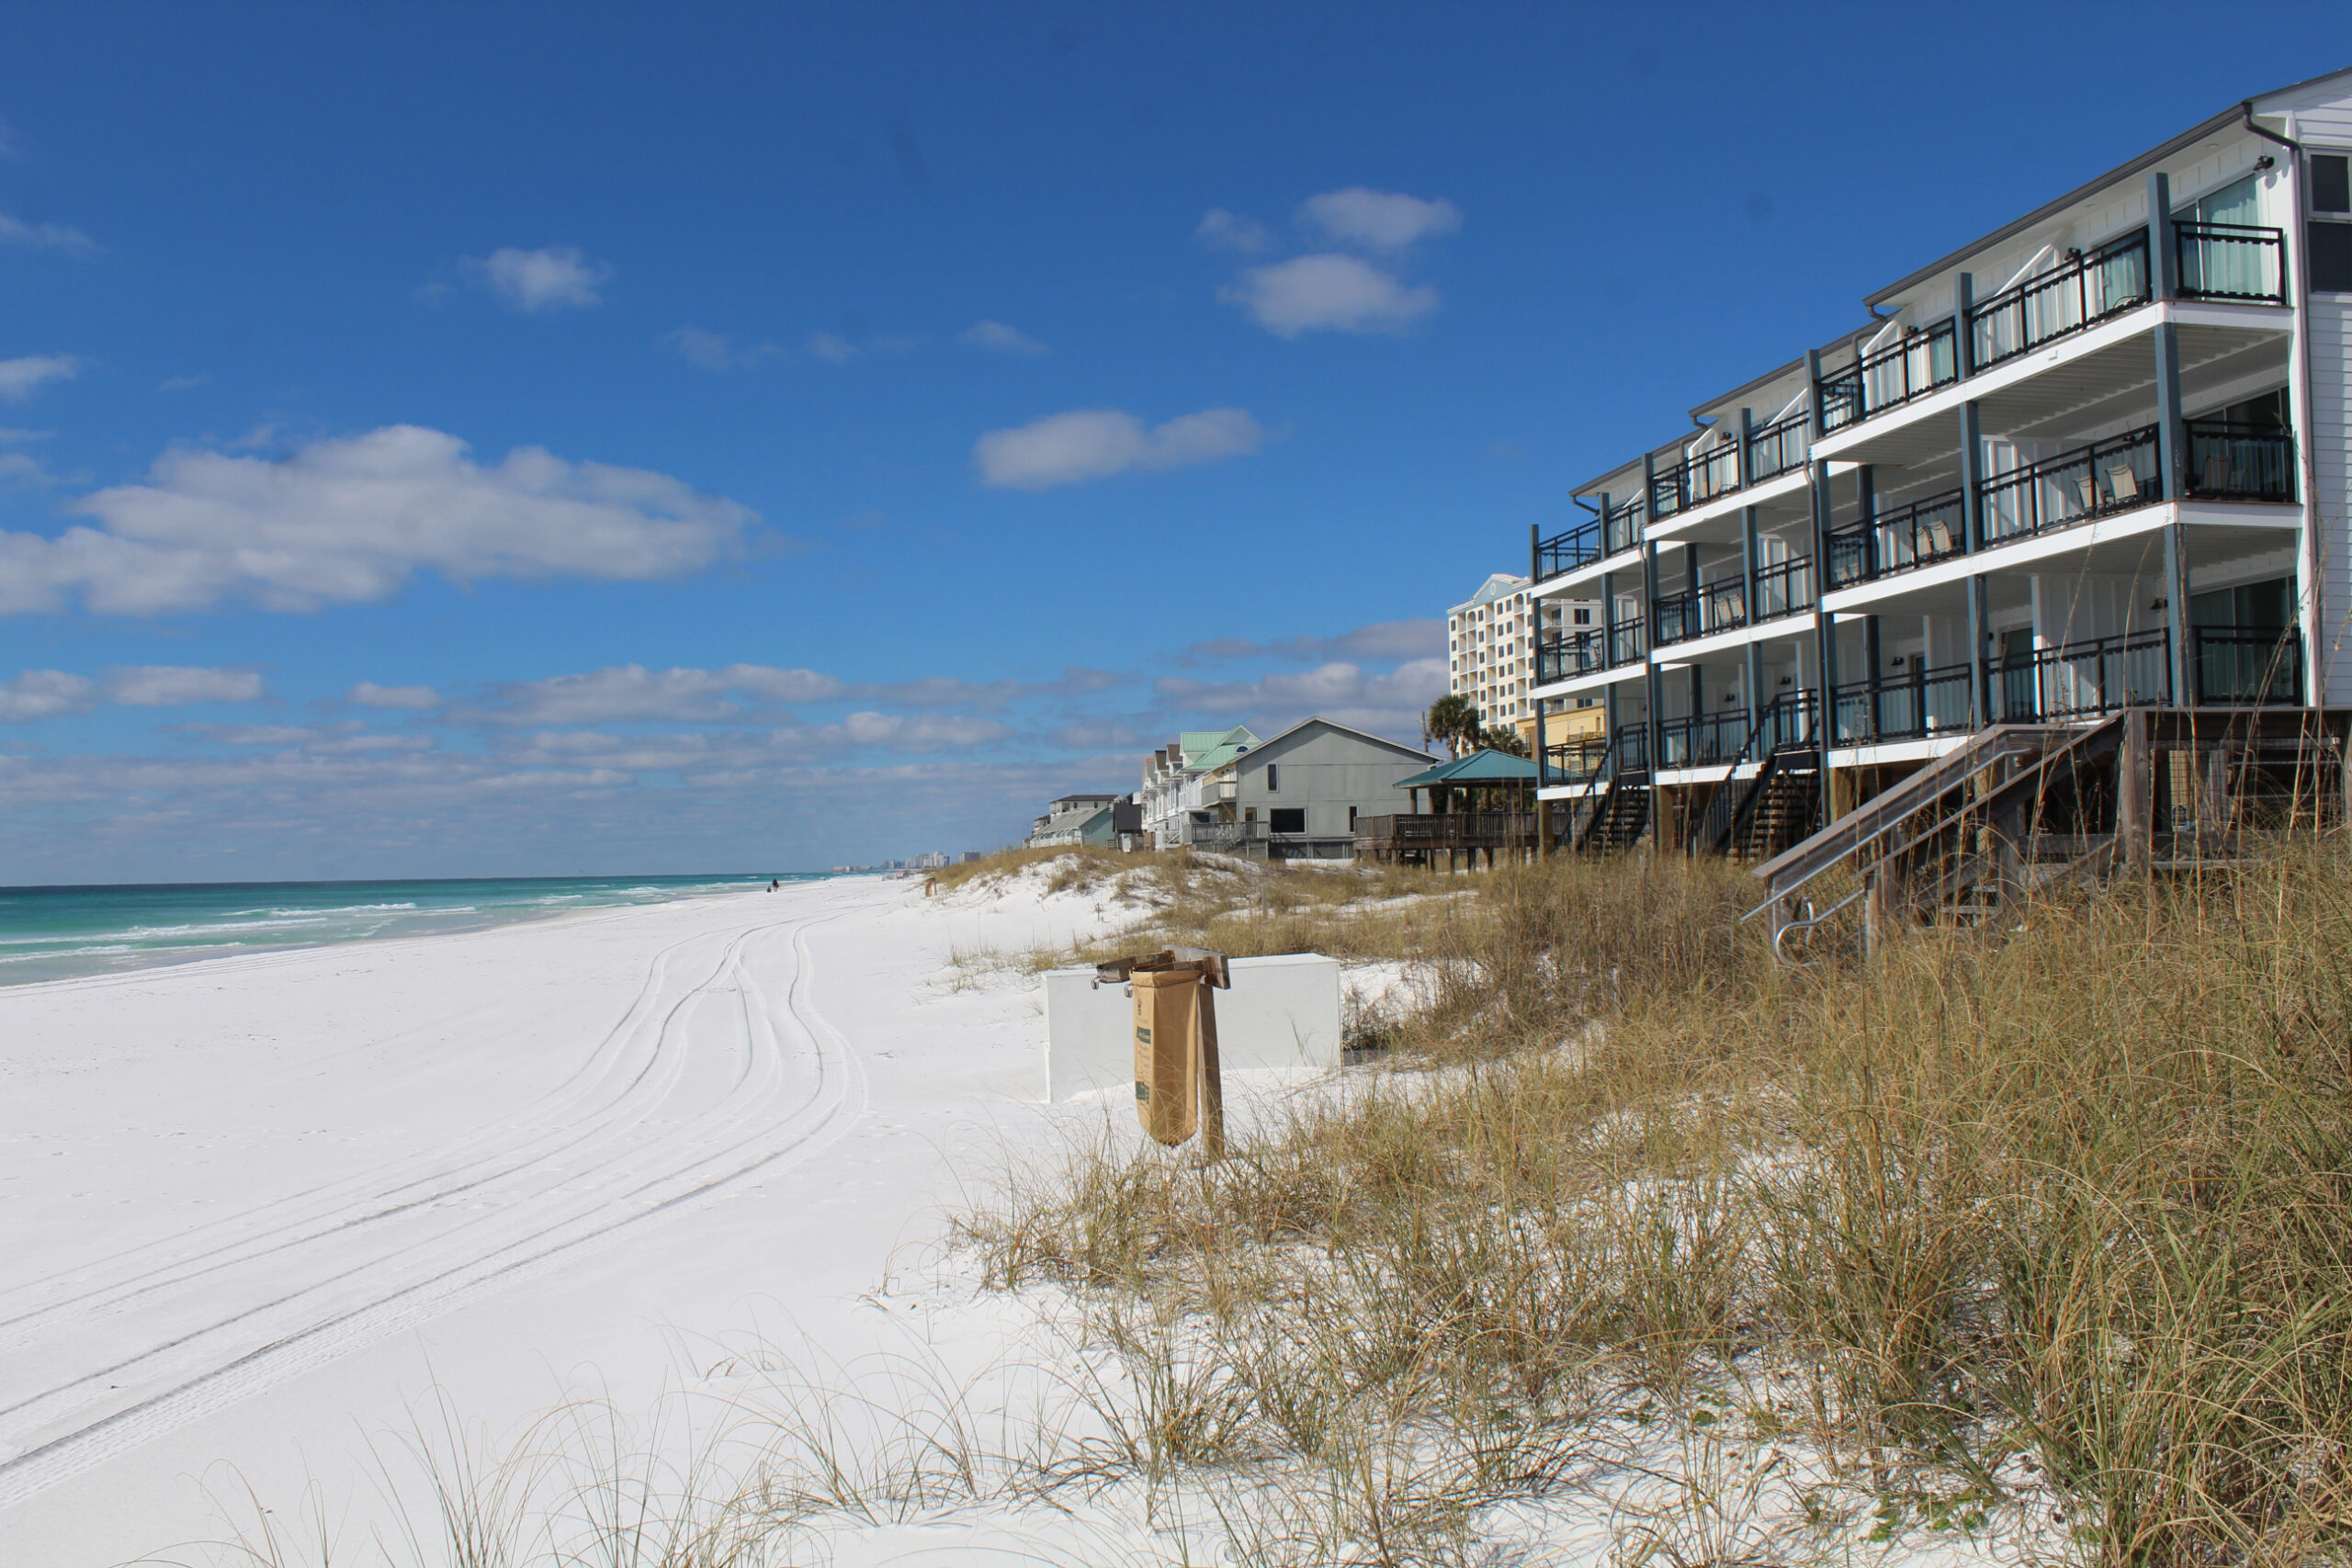 An example of prime beachfront property, the units are directly accessible to the sand at ground level. Miramar Beach, Northwest Florida.